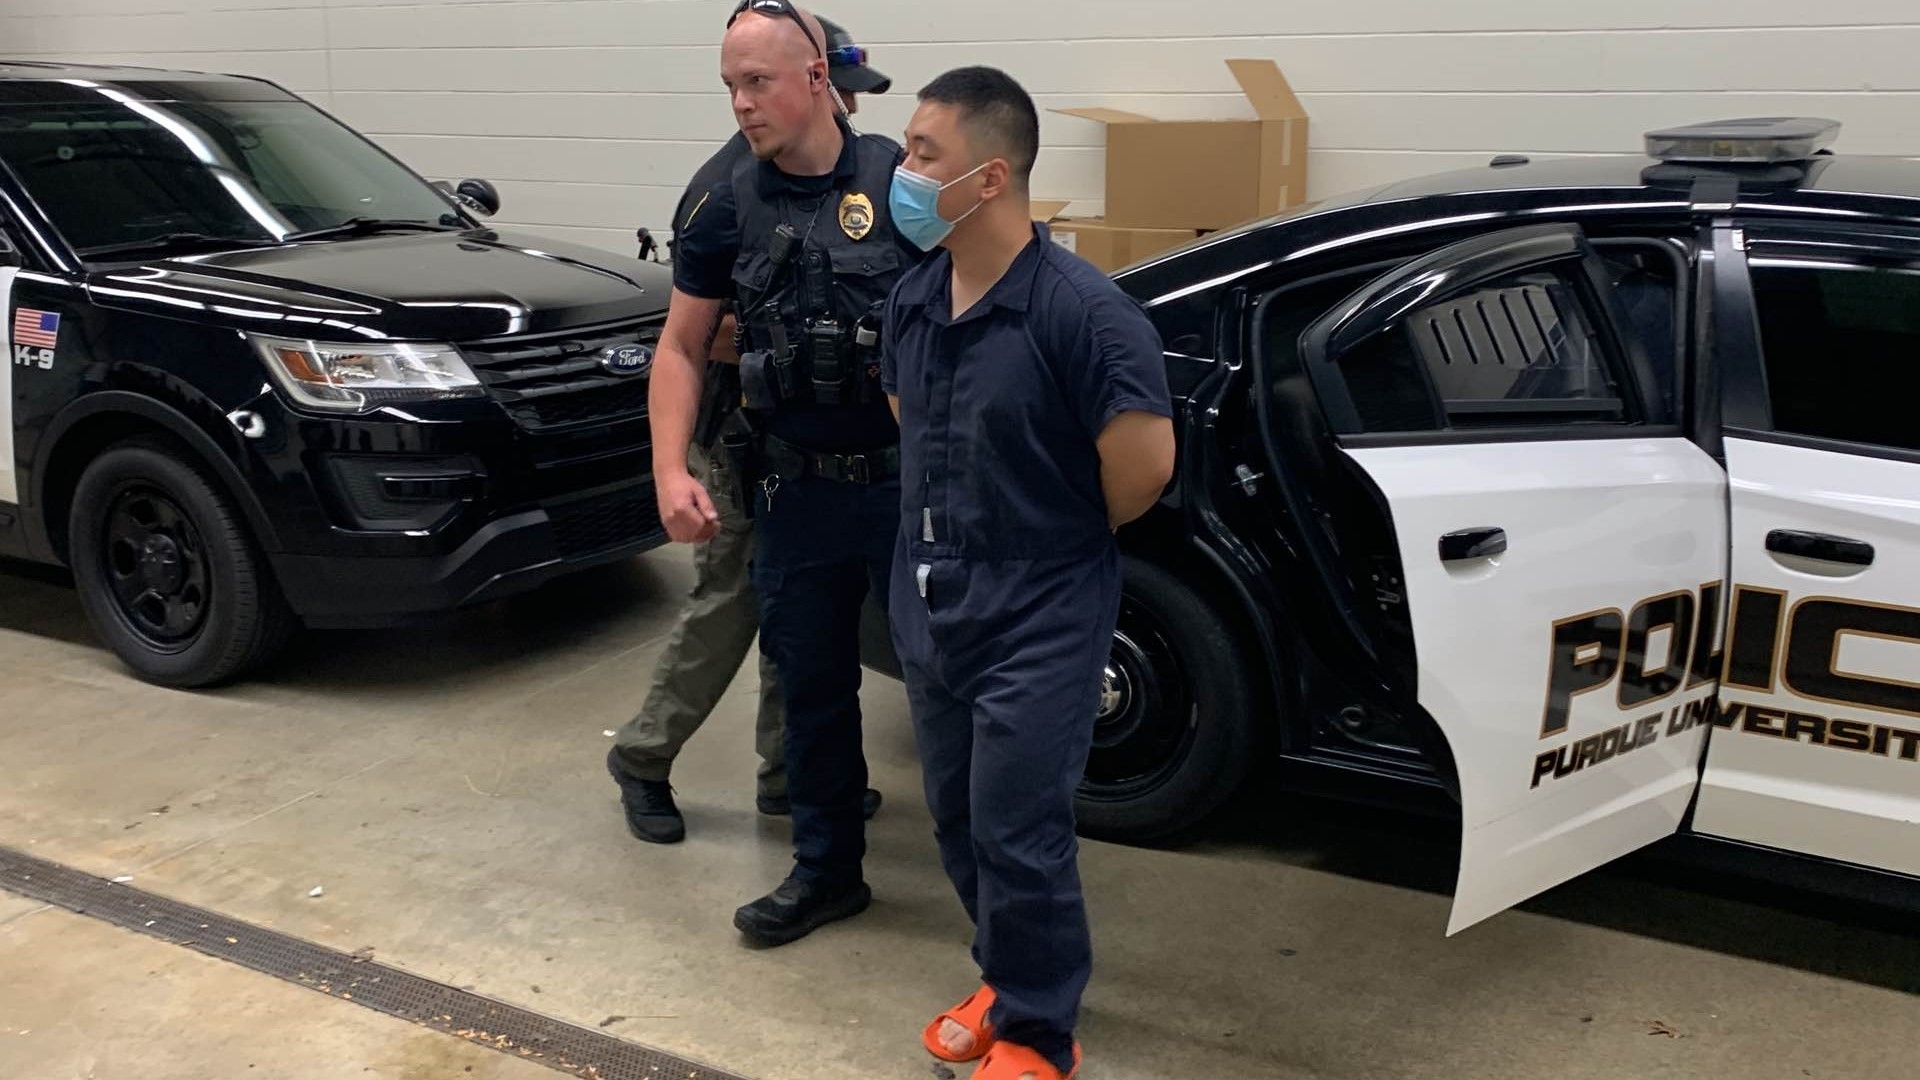 Purdue University Police Chief Lesley Wiete identified the suspect as 22-year-old Ji Min Sha, a junior who is studying cybersecurity at Purdue.